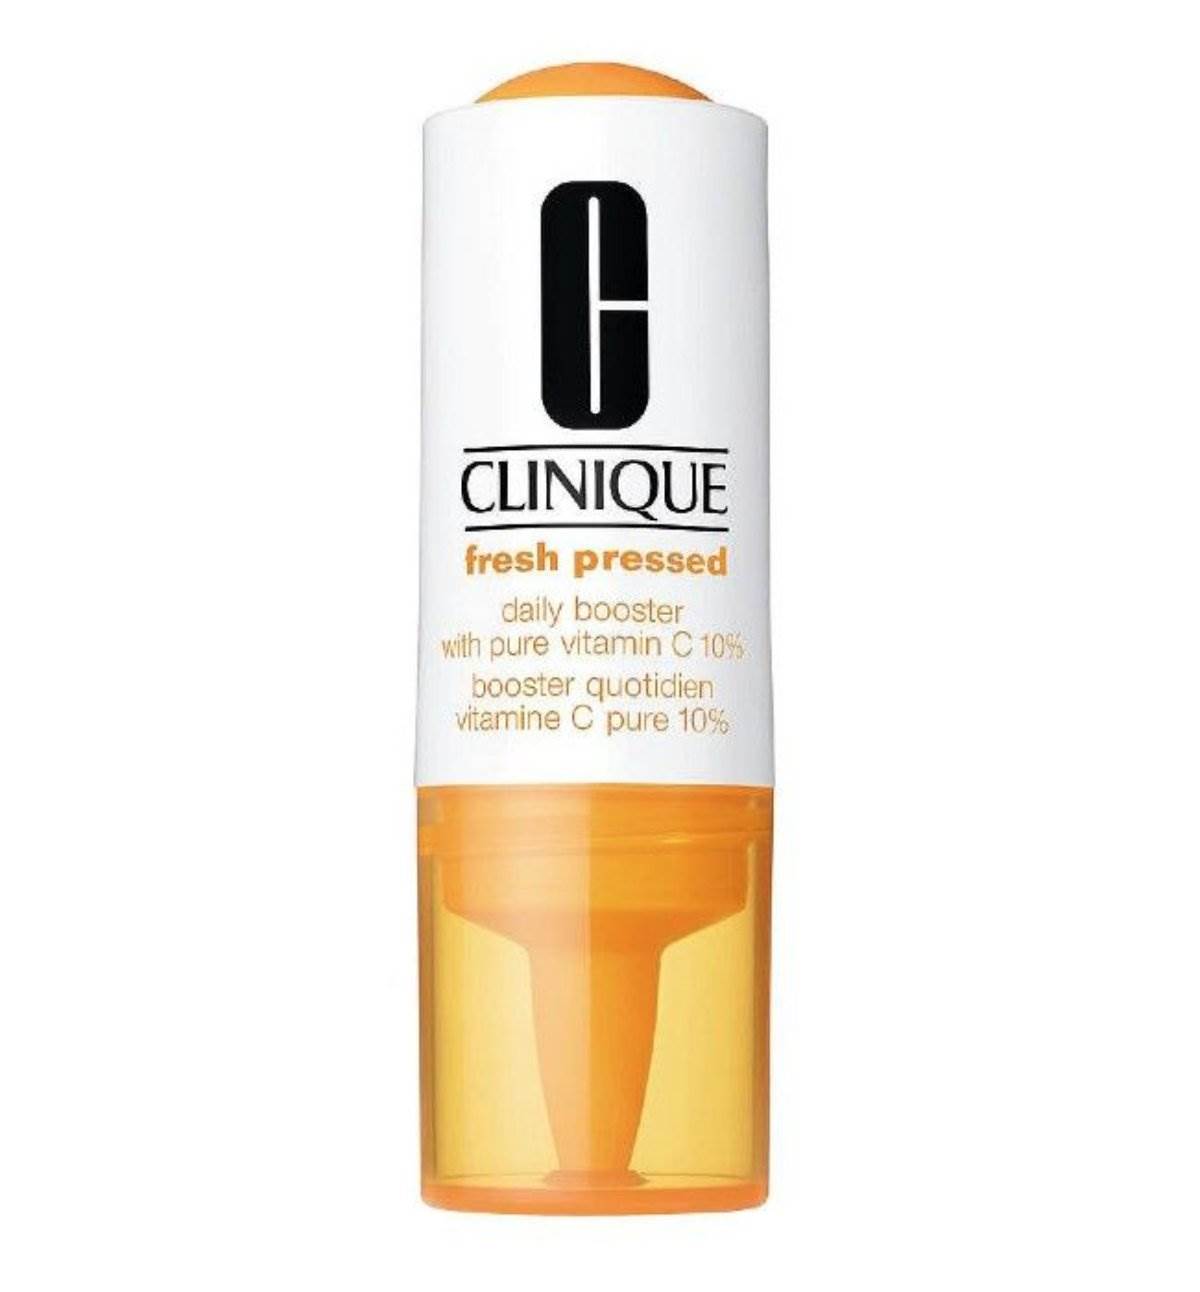  Clinique – Fresh Pressed Daily Booster with Pure Vitamin C 10% je serum buster. 